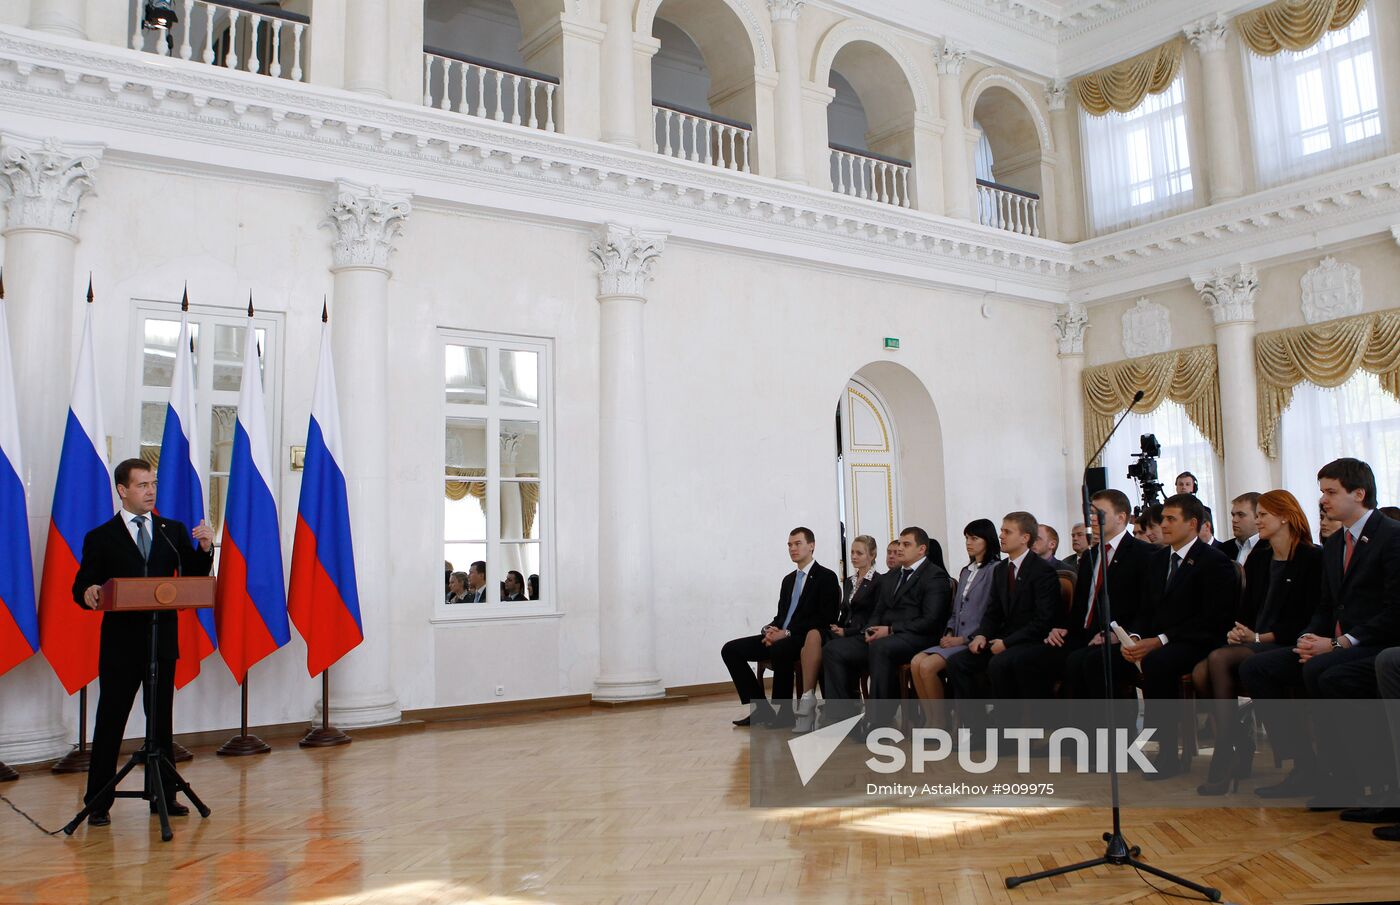 Dmitry Medvedev's working visit to Central Federal District